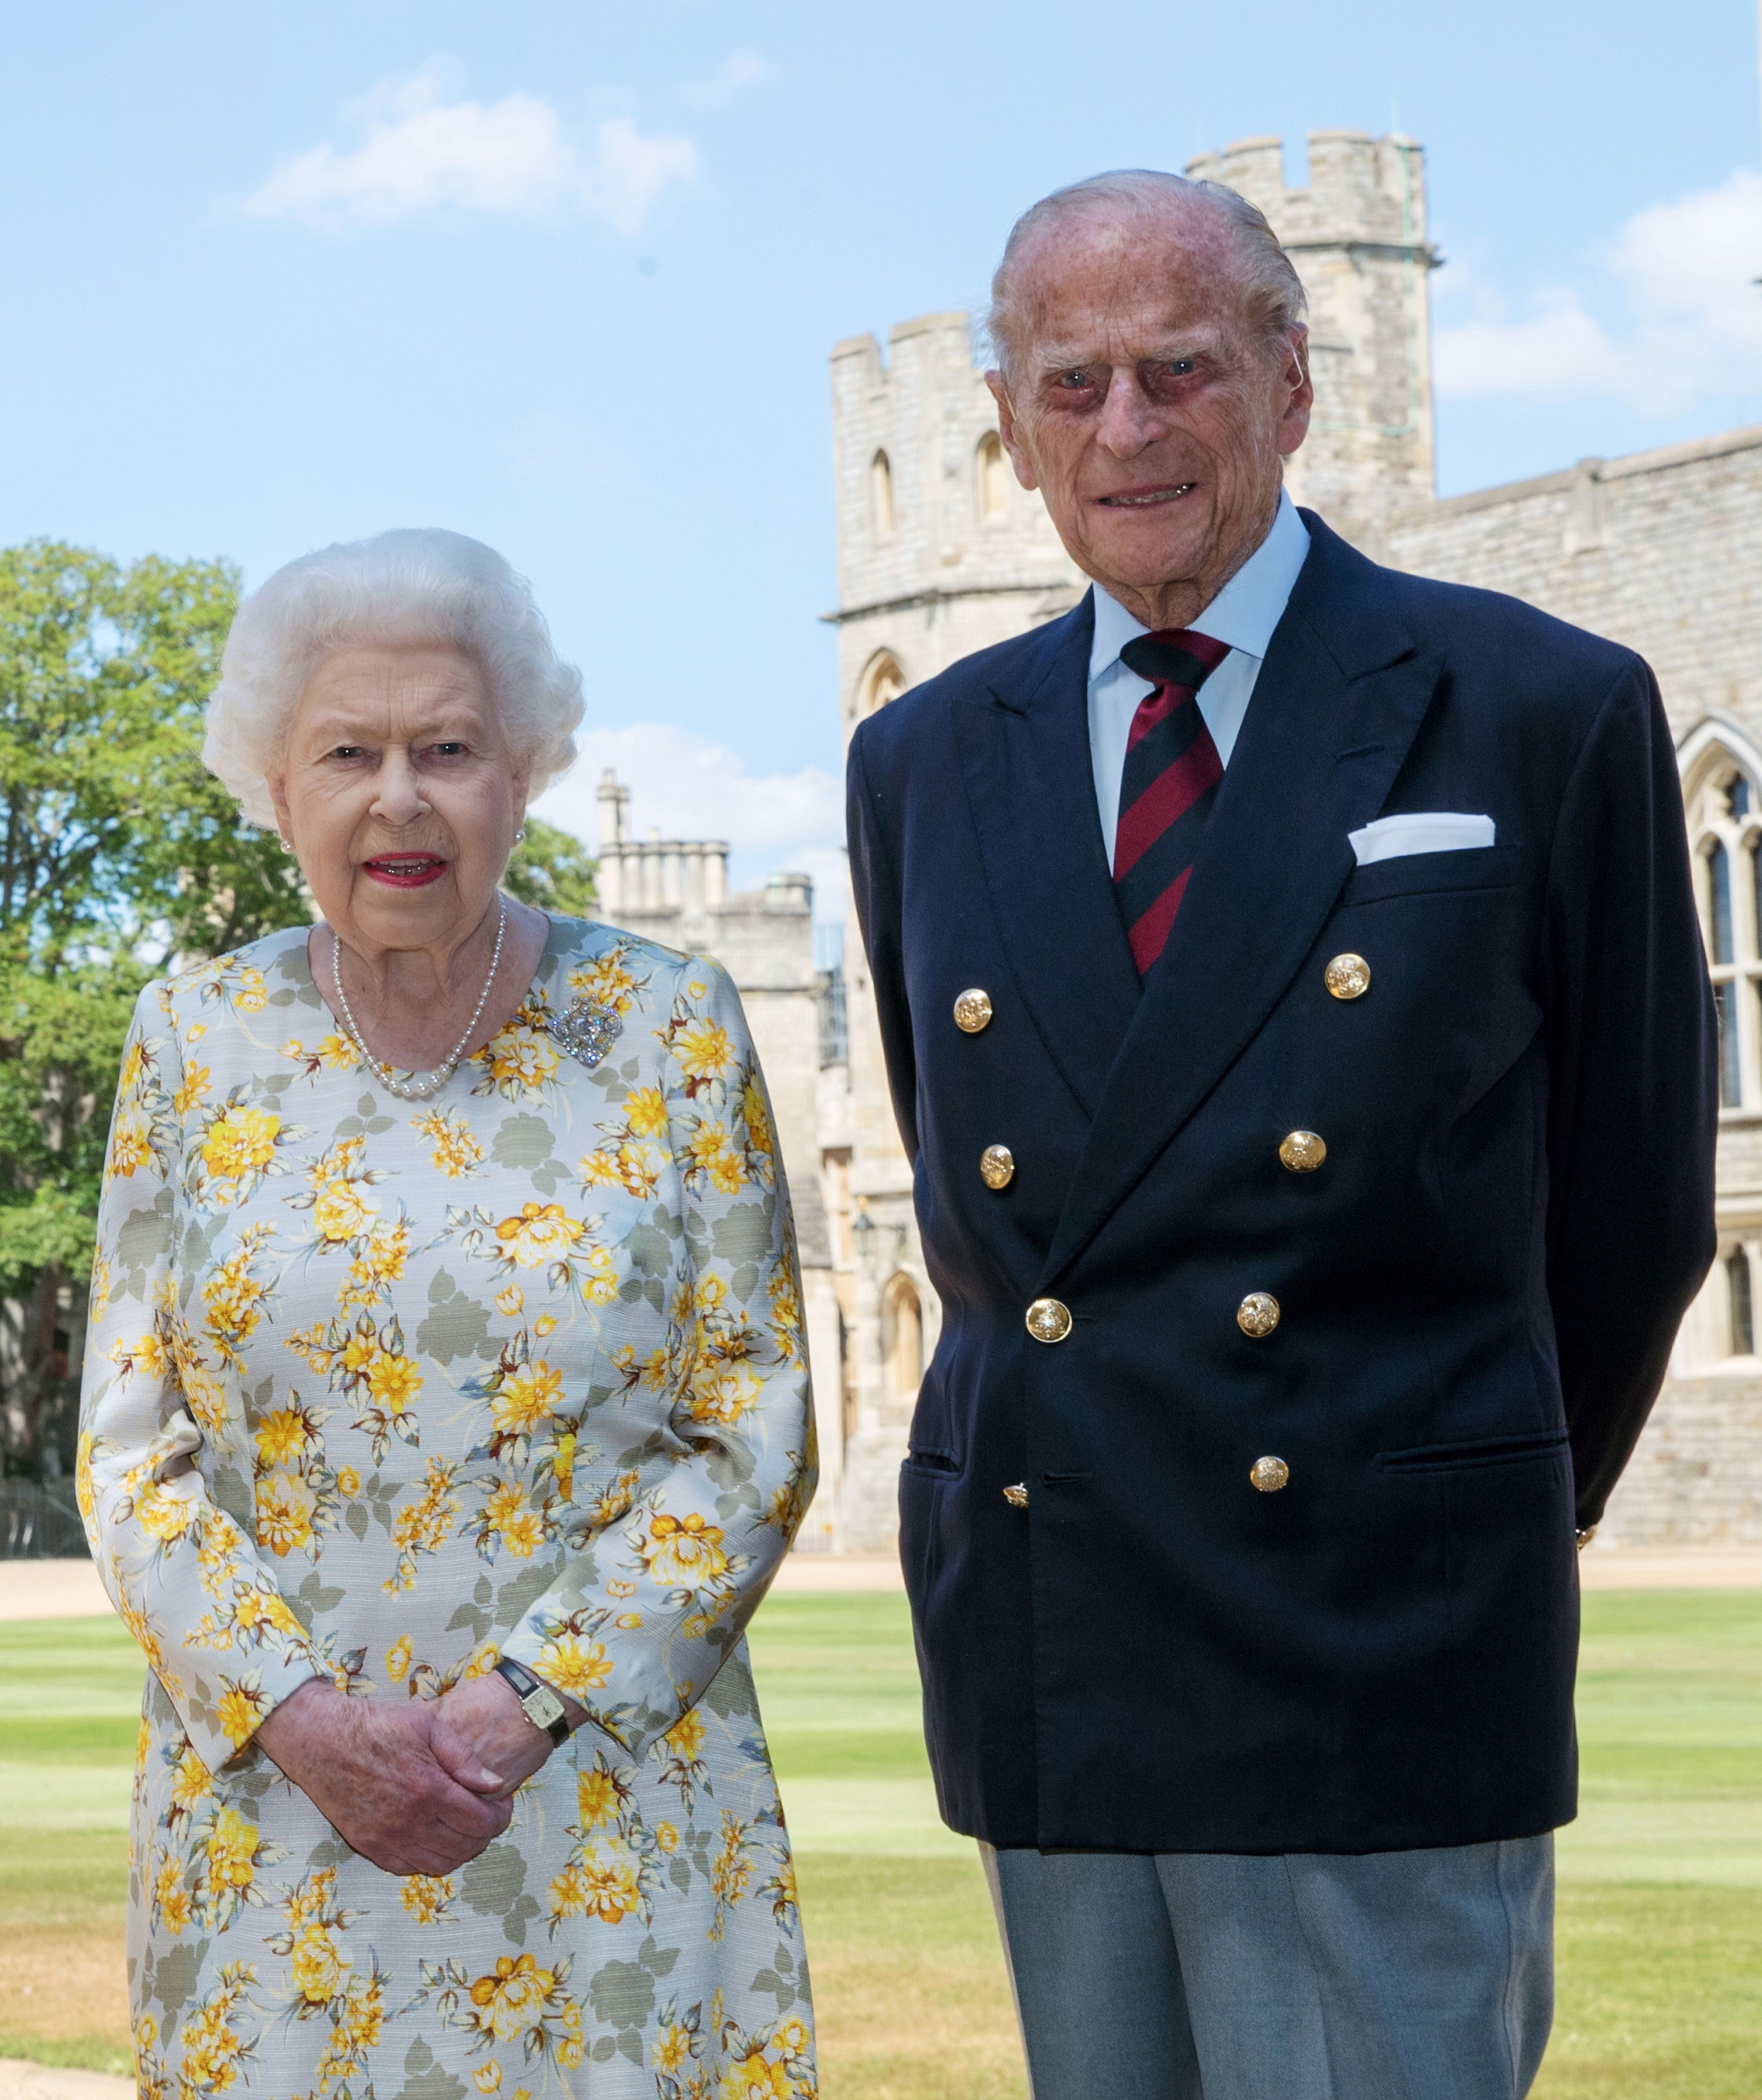 Queen Elizabth and Prince Philip in the quadrangle of Windsor Castle ahead of his 99th birthday. | Source :Getty Images